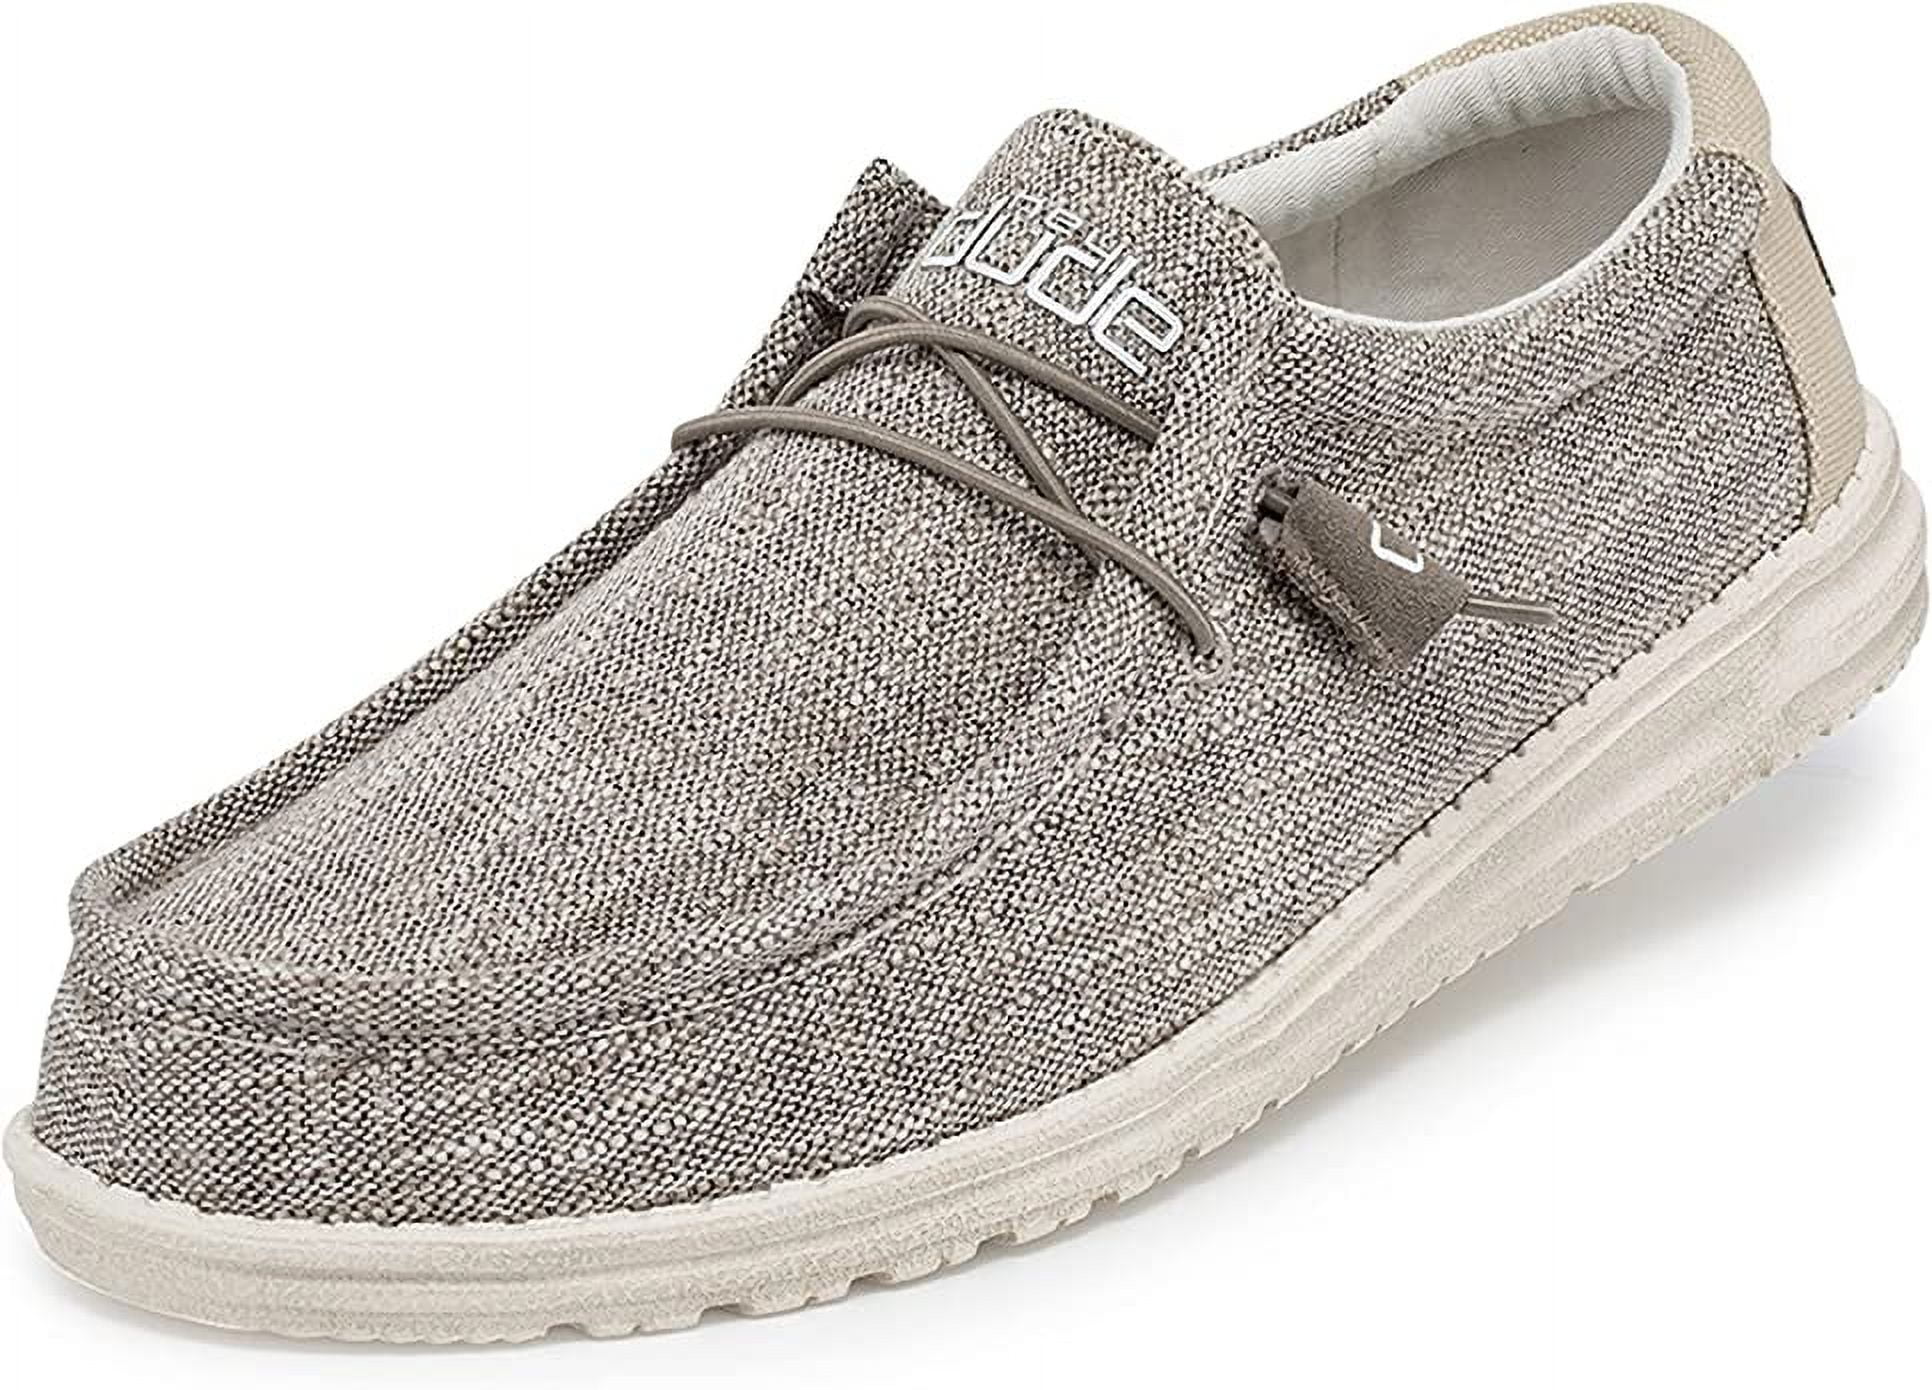 Hey Dude Wendy Size 9 Women's Shoes - Chambray Beige for sale online